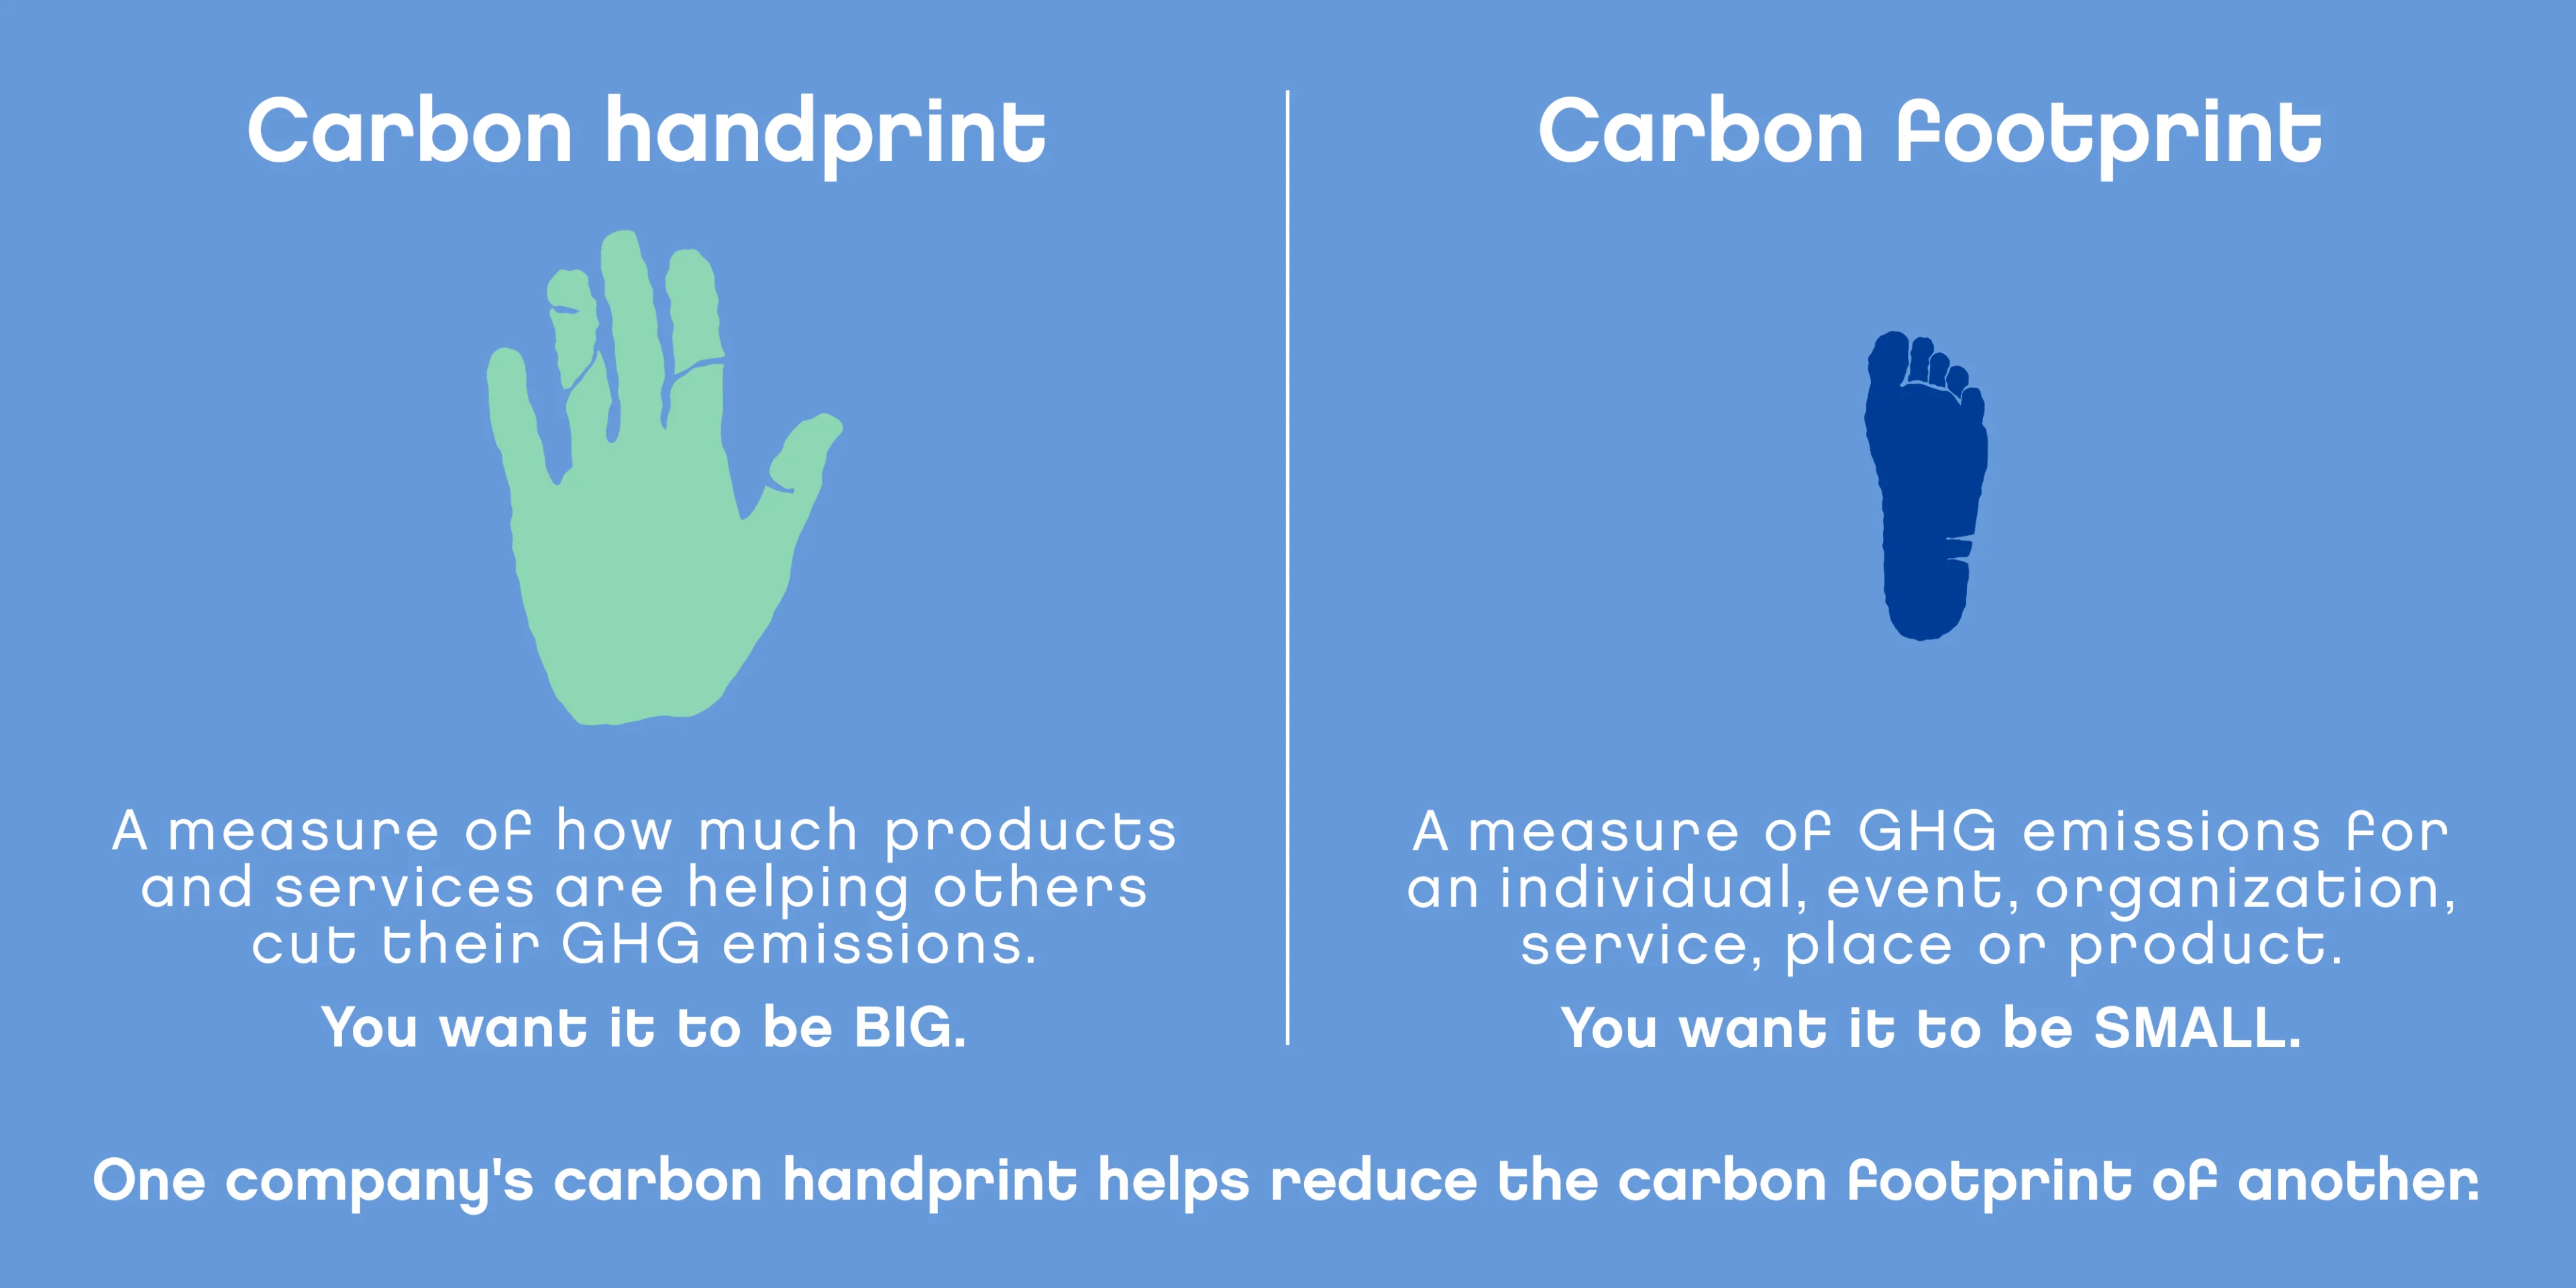 Carbon handprint and footprint explained